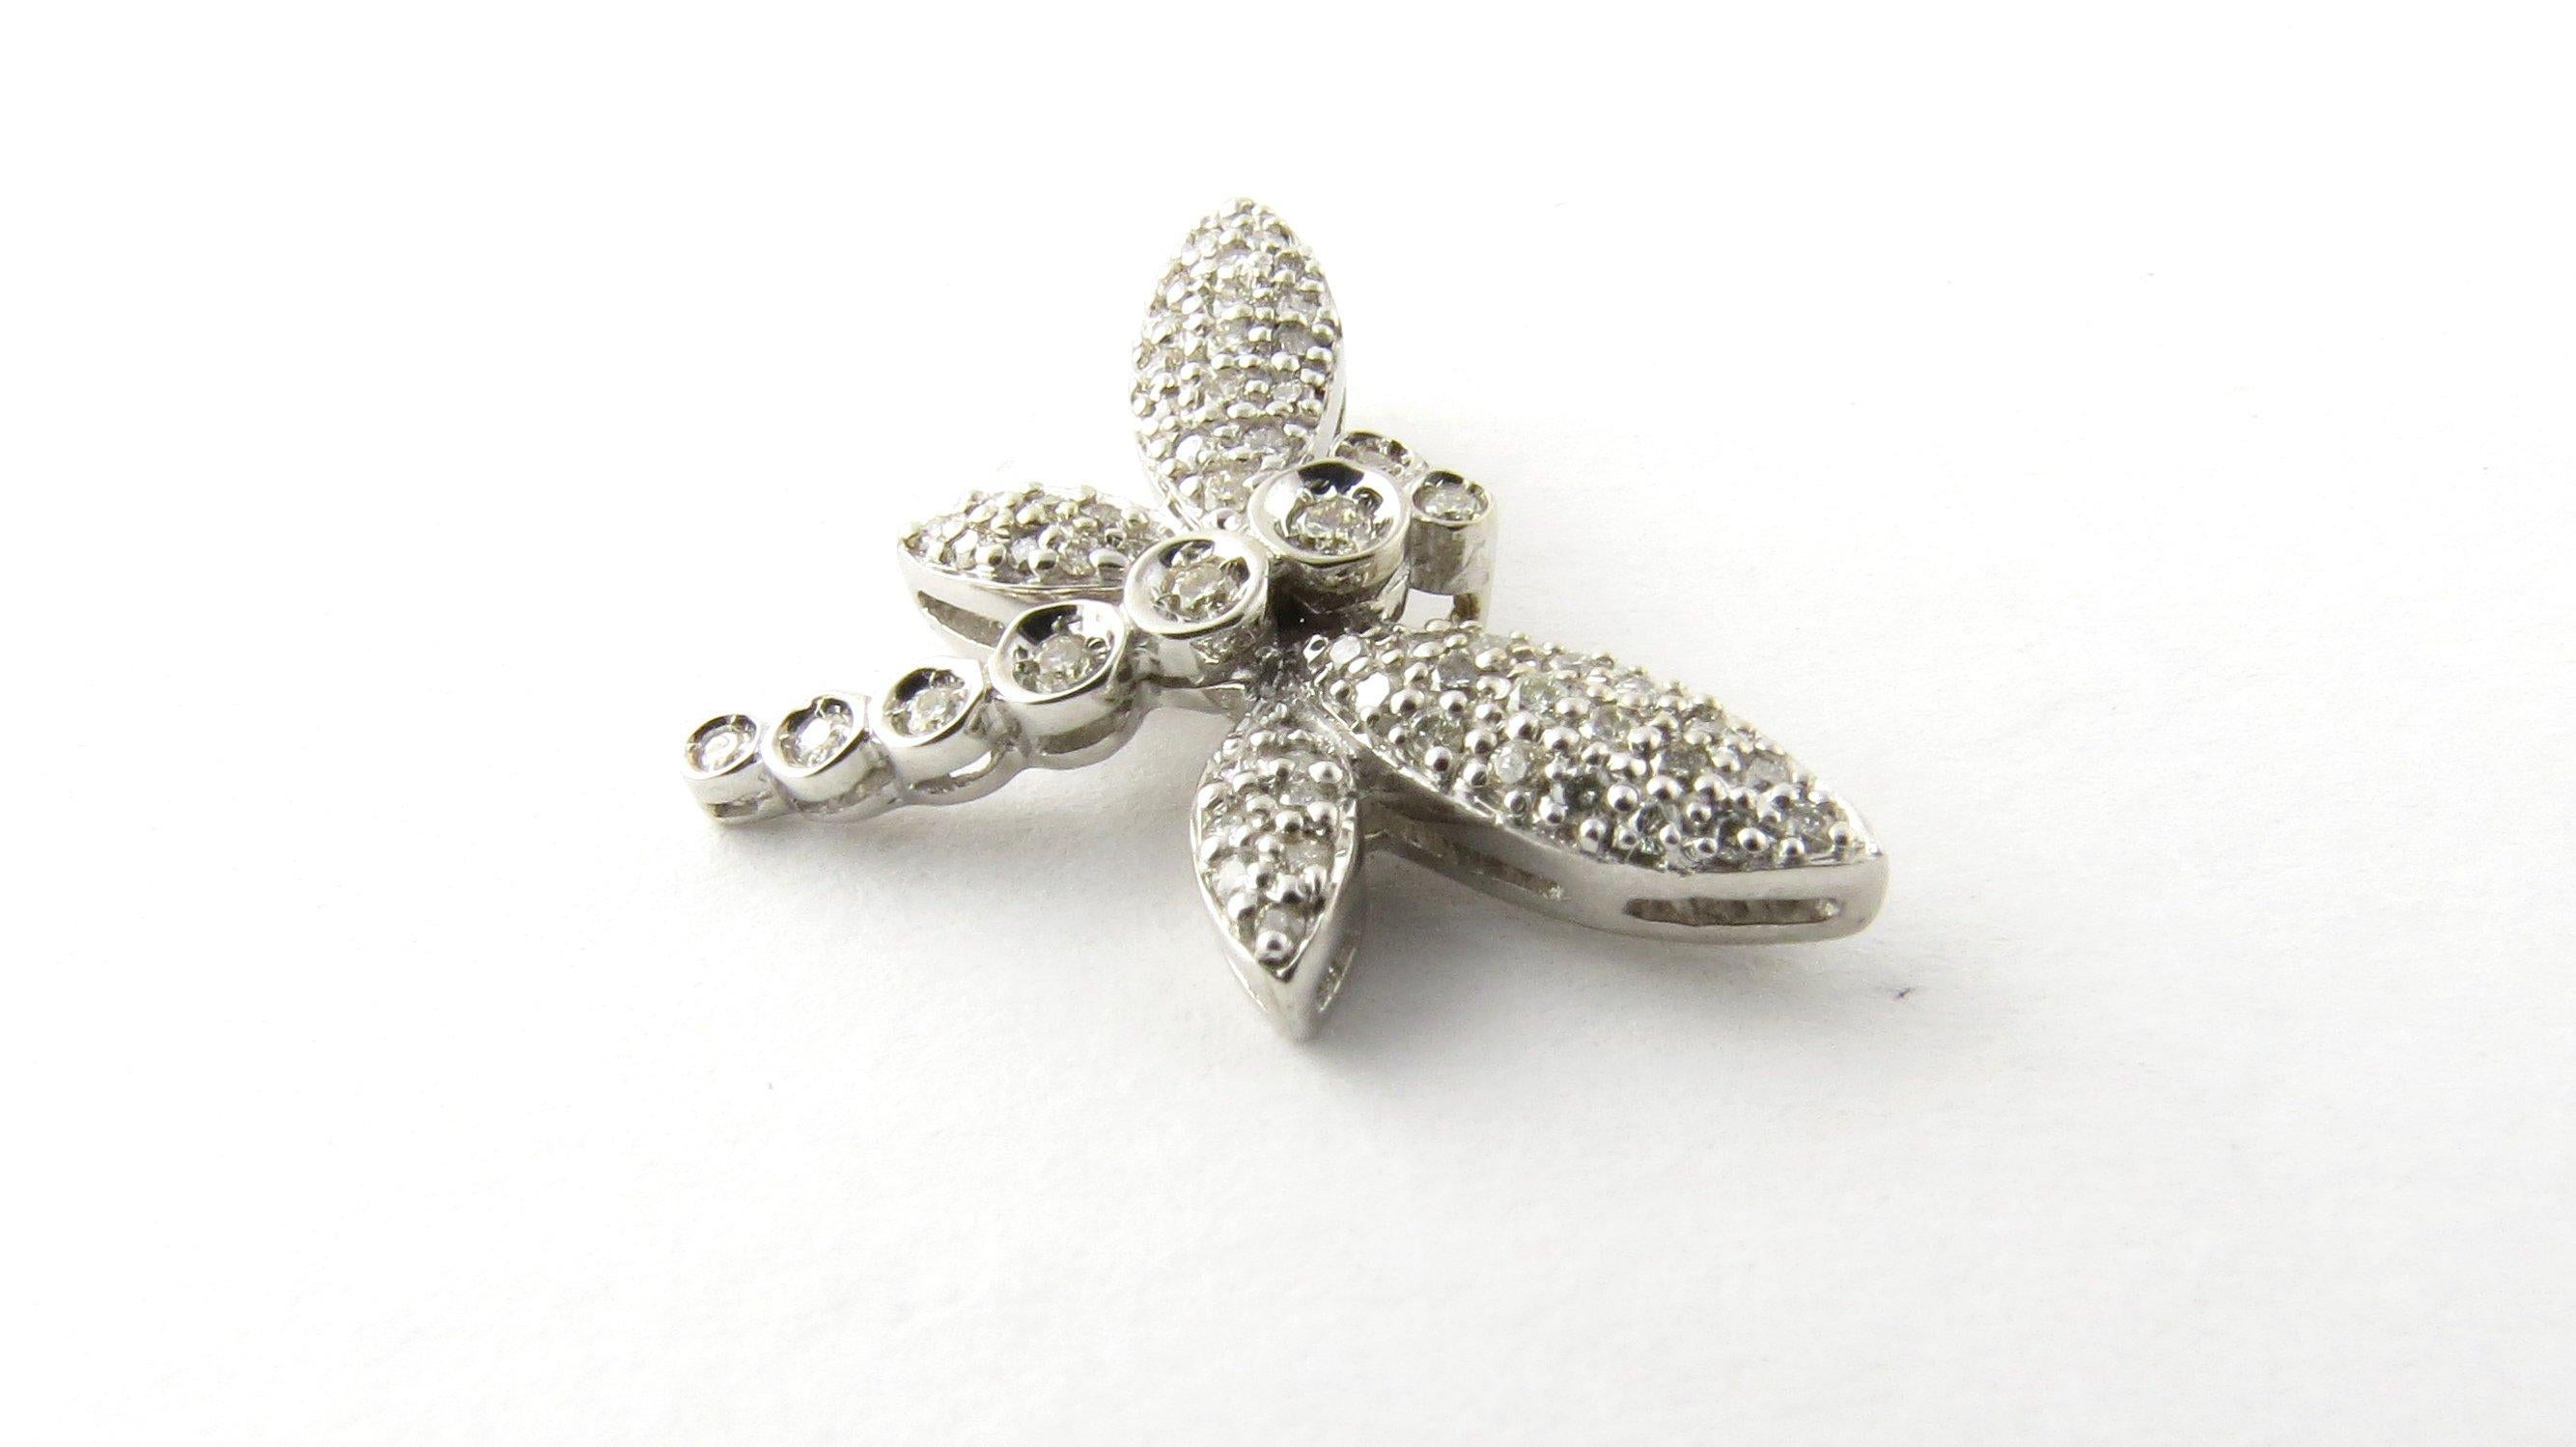 Vintage 14 Karat White Gold Diamond Dragonfly Pendant- 
This sparkling pendant features a delicate dragonfly decorated with 62 round brilliant cut diamonds set in classic 14K white gold. 
Approximate total diamond weight: .37 ct. 
Diamond color: J-K